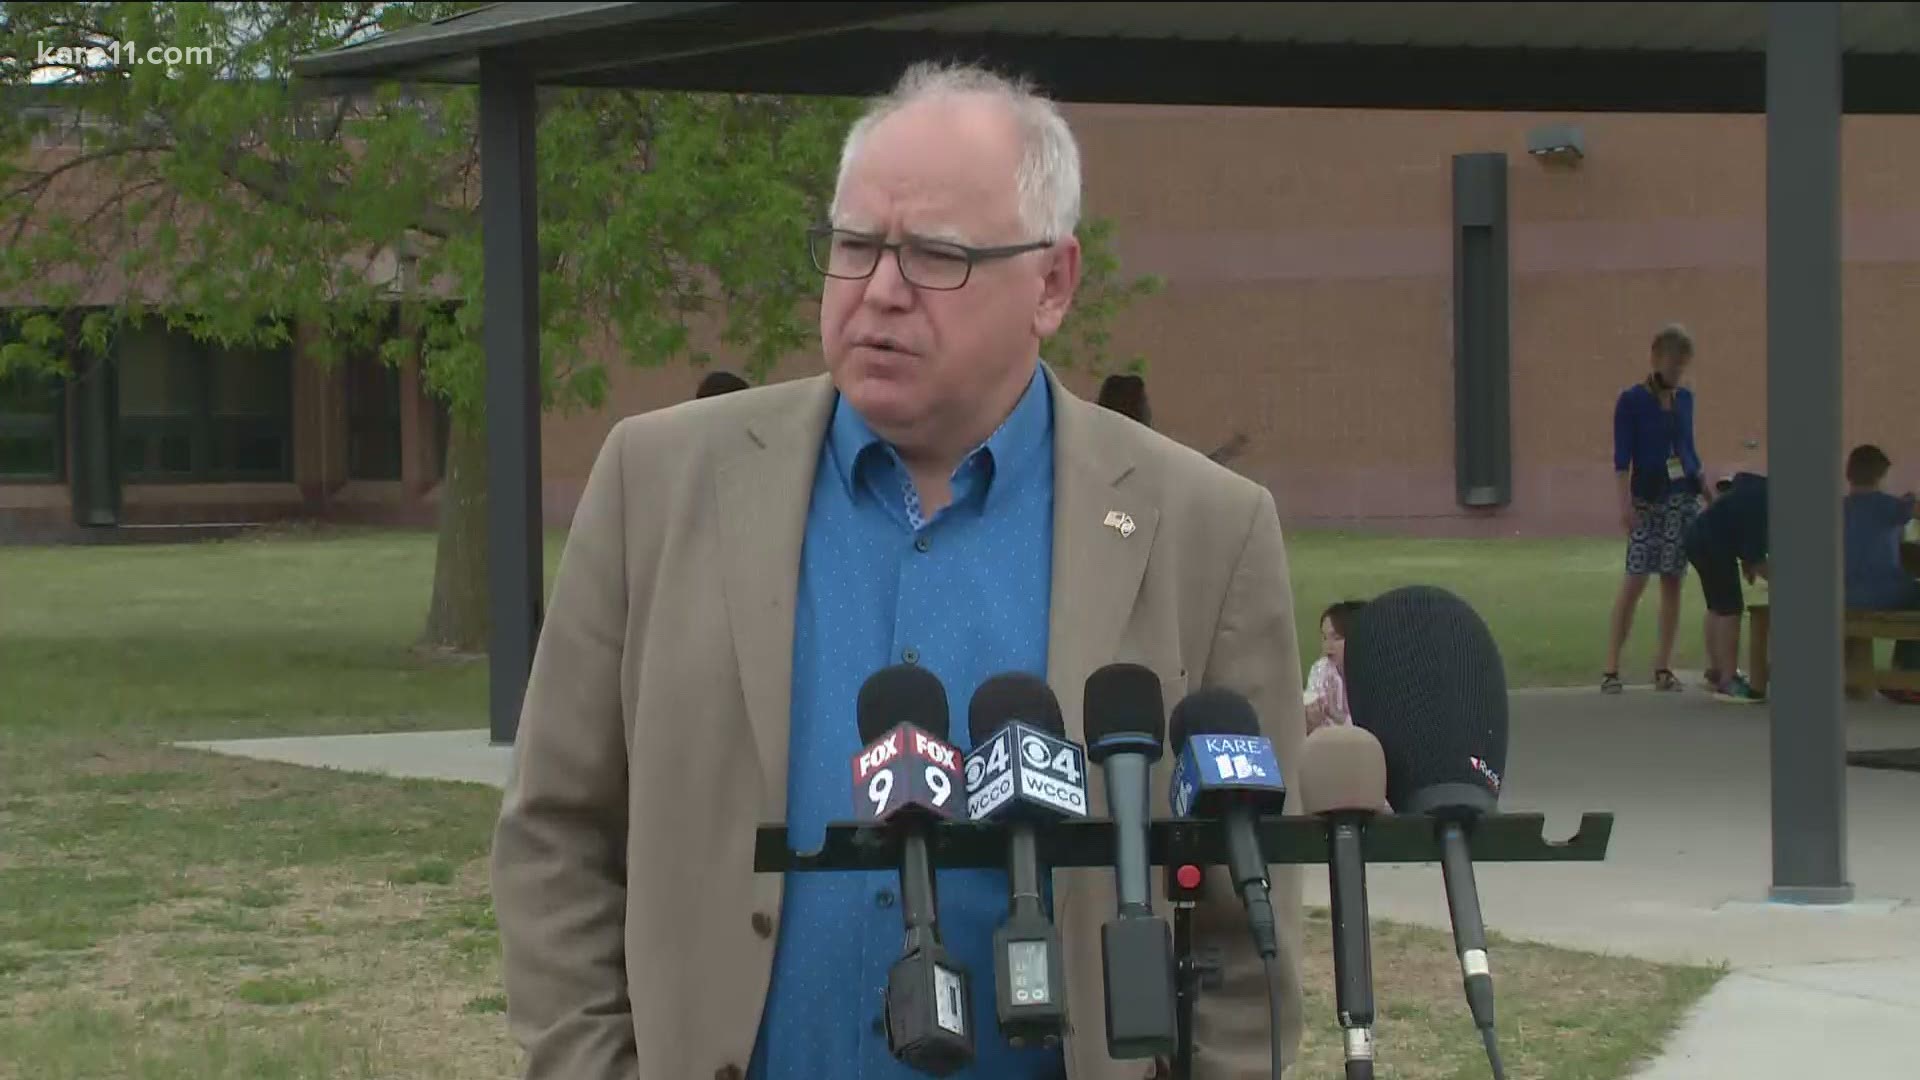 Walz said he will allocate $75 million of the state’s American Rescue Plan funds towards academic enrichment and mental health support for kids in summer learning.